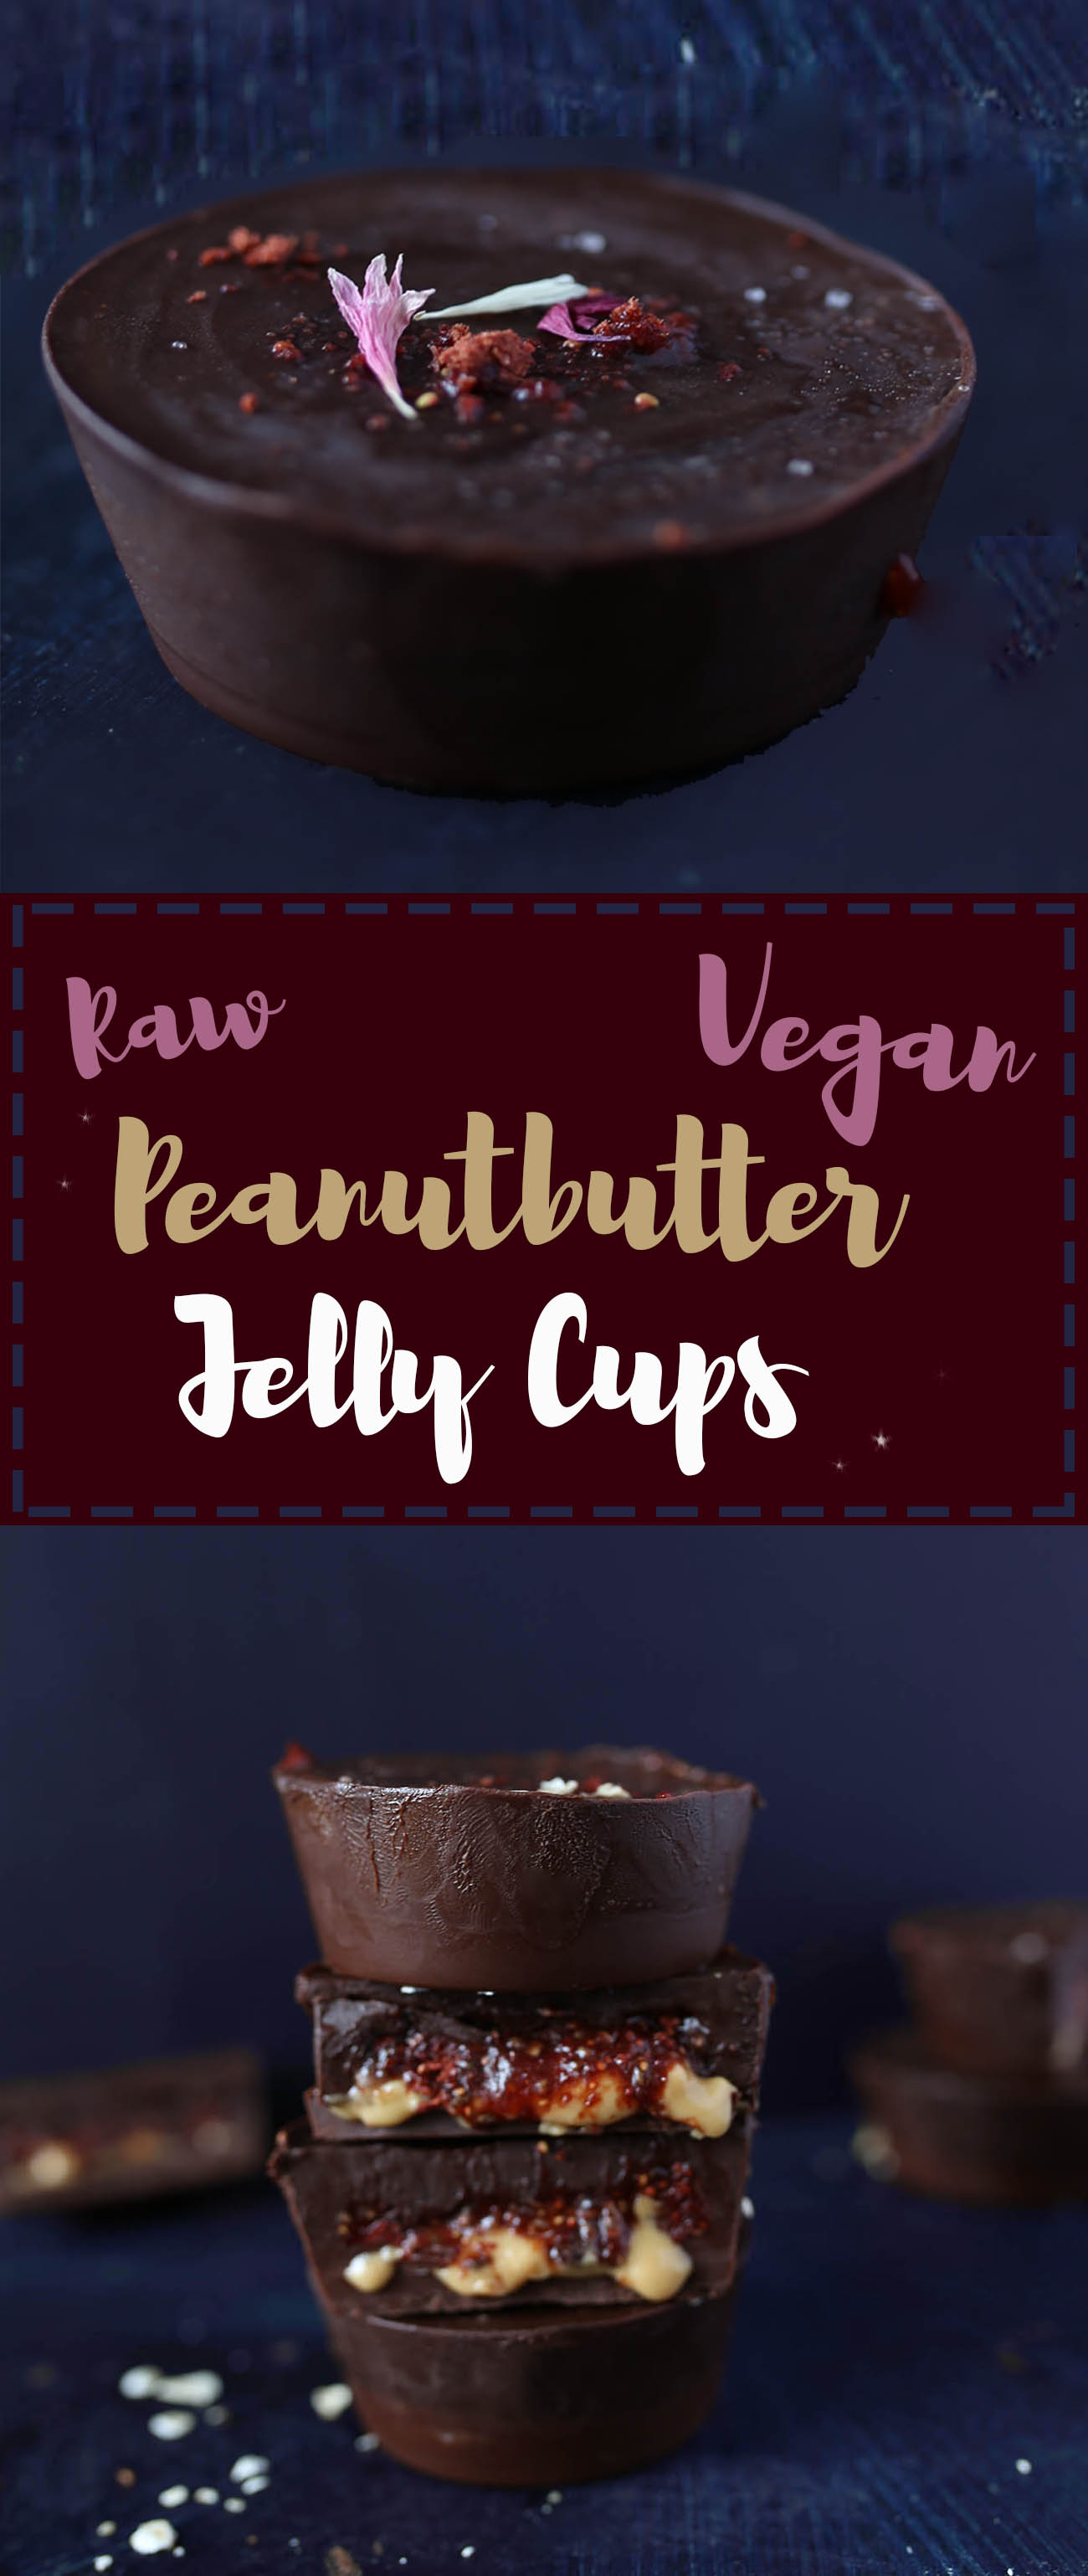 Bloody Peanut butter Jelly Cups for Halloween {raw, gluten-free}